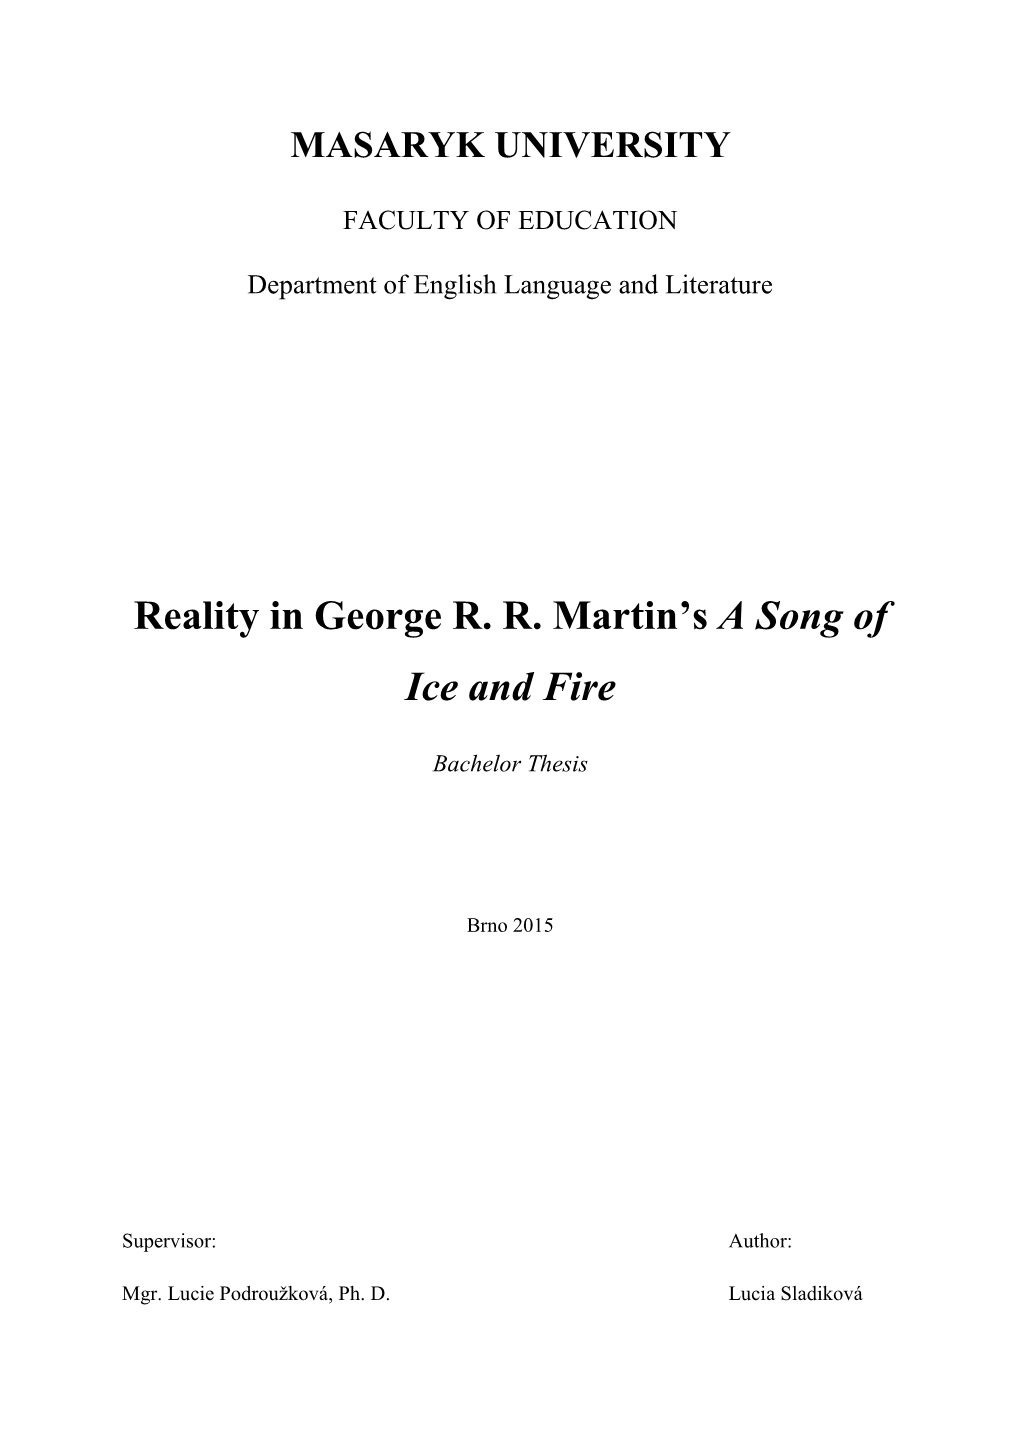 Reality in George R. R. Martin's a Song of Ice and Fire